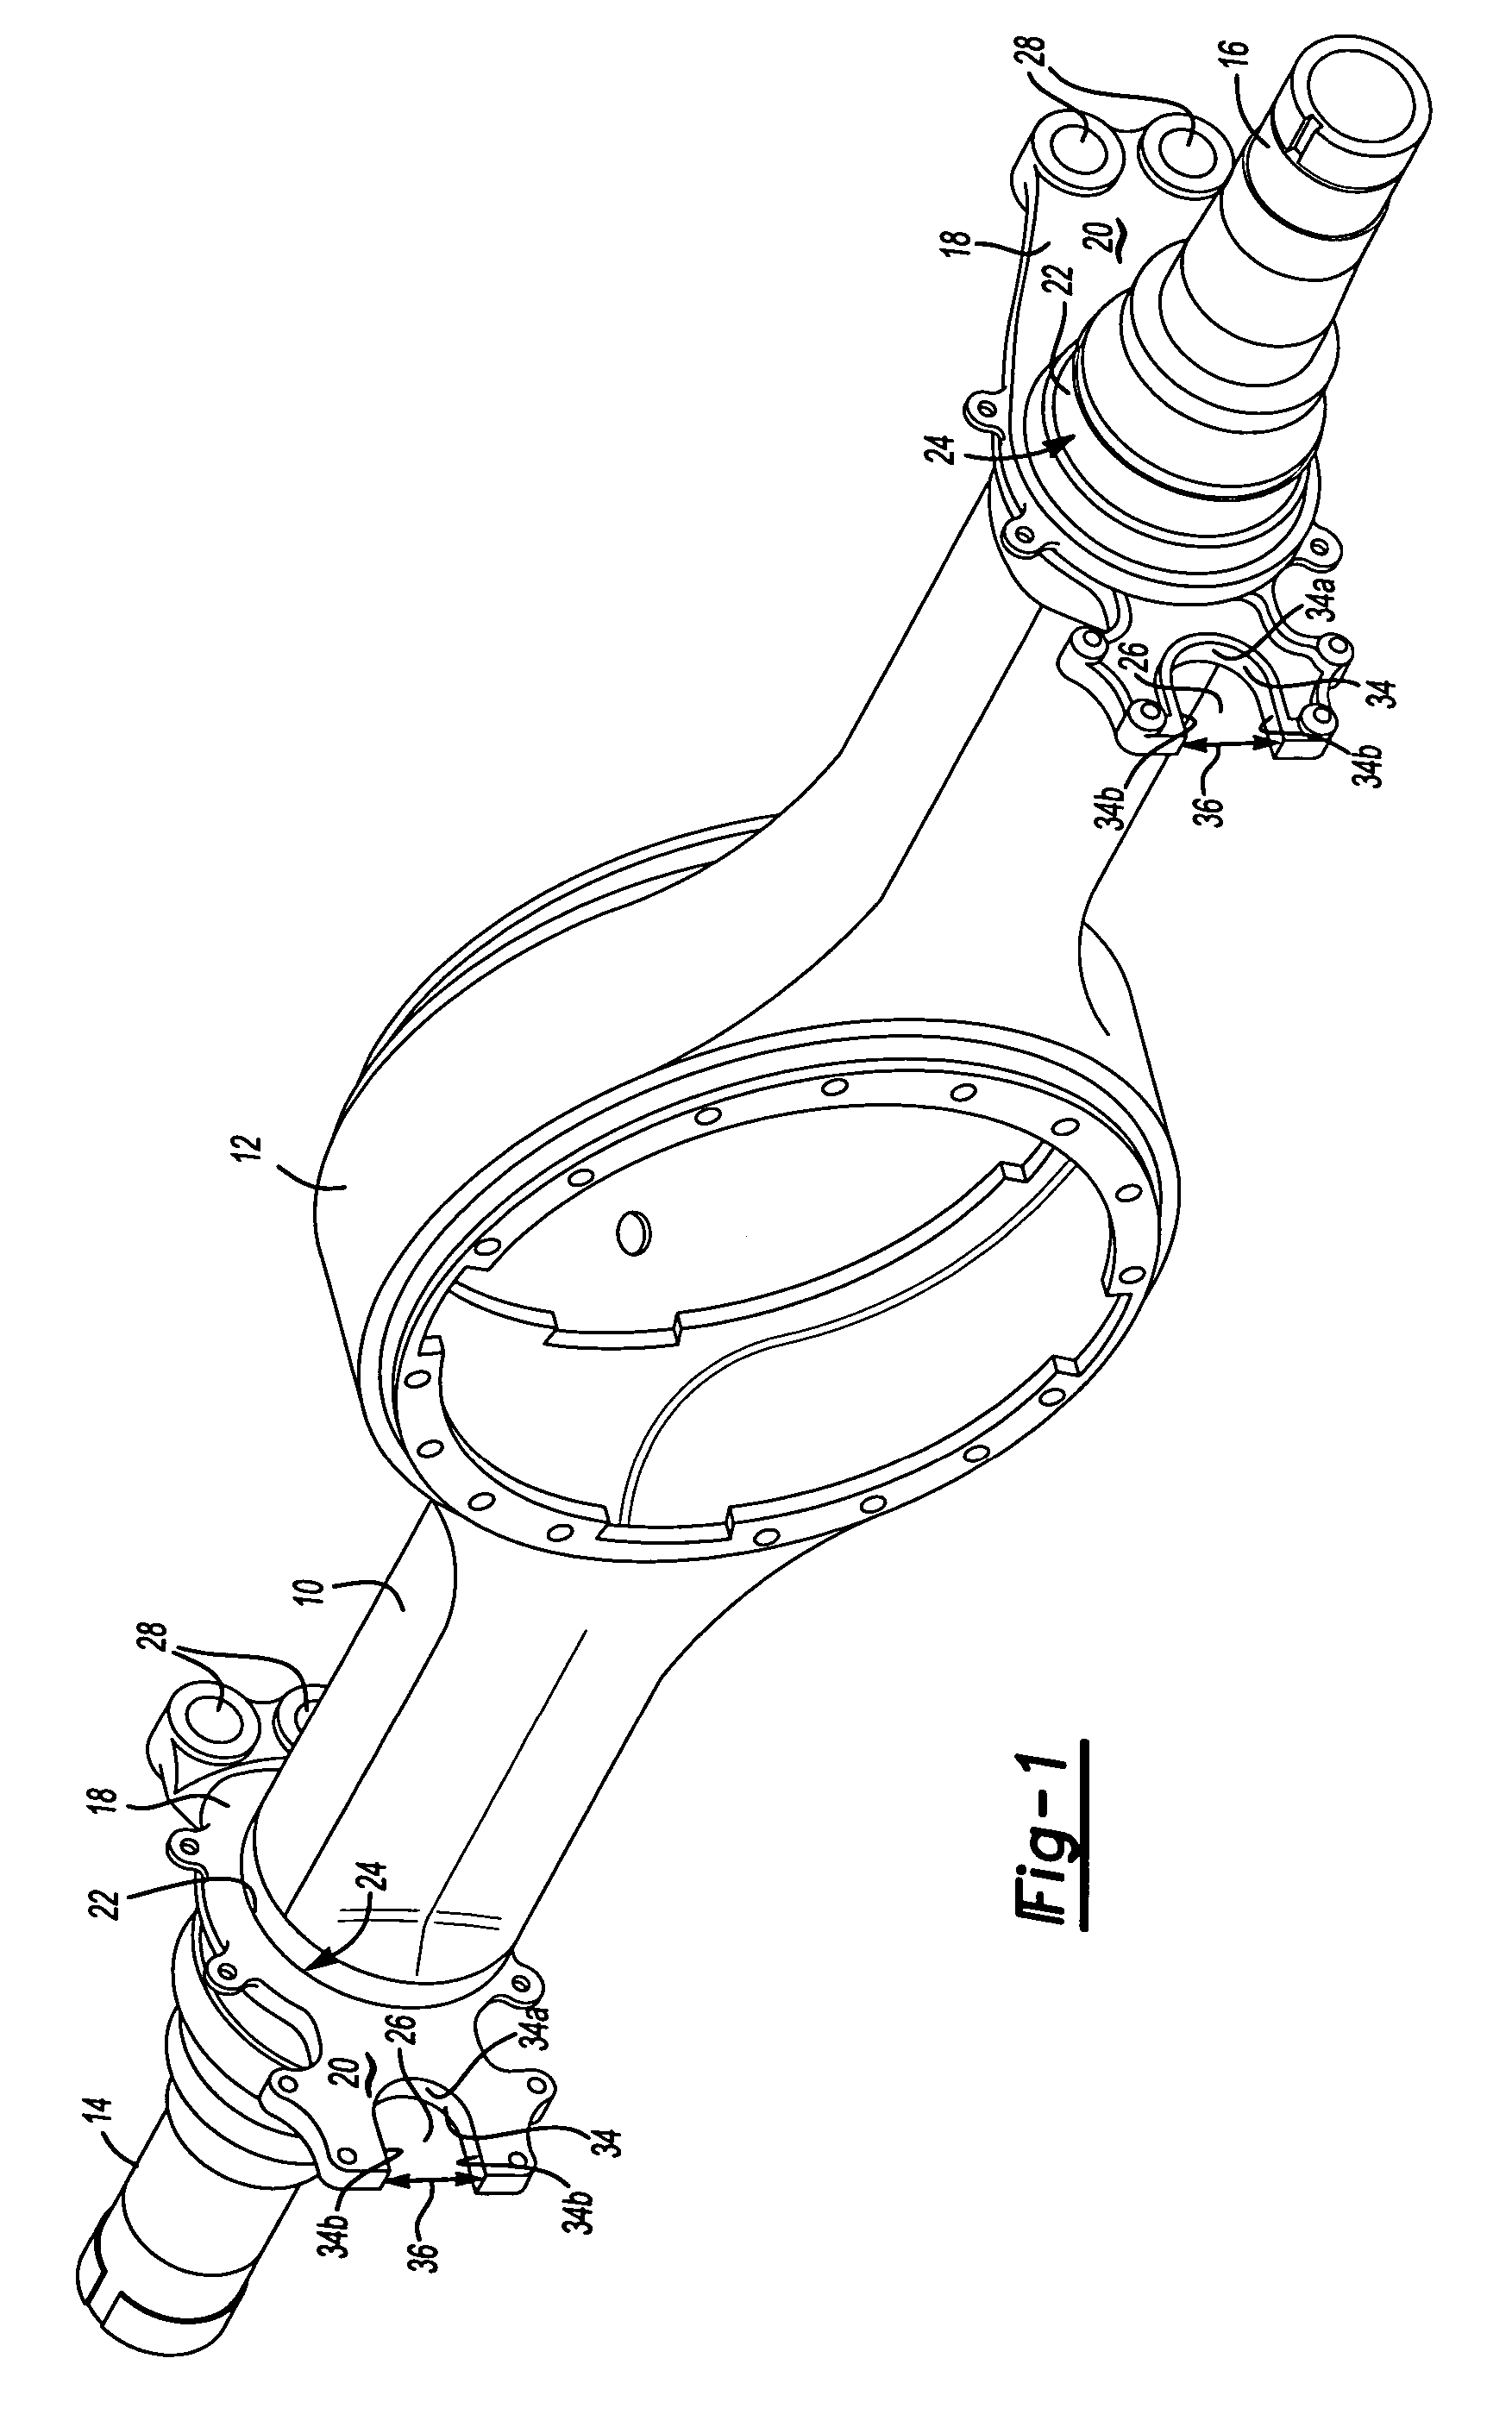 Brake spider and axle housing assembly